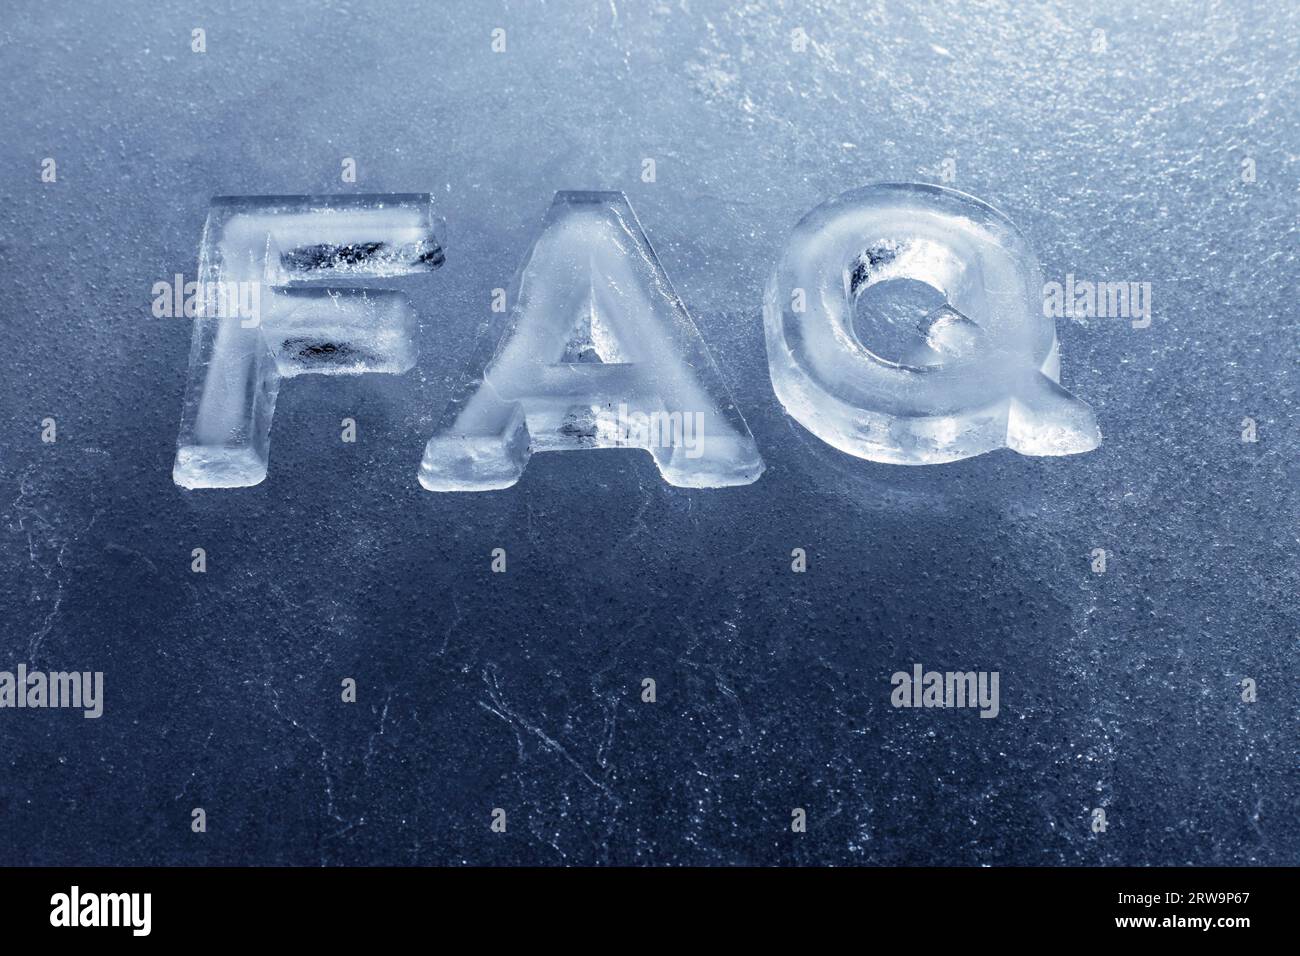 Abbreviation FAQ (Frequently Asked Questions) made of real ice letters Stock Photo